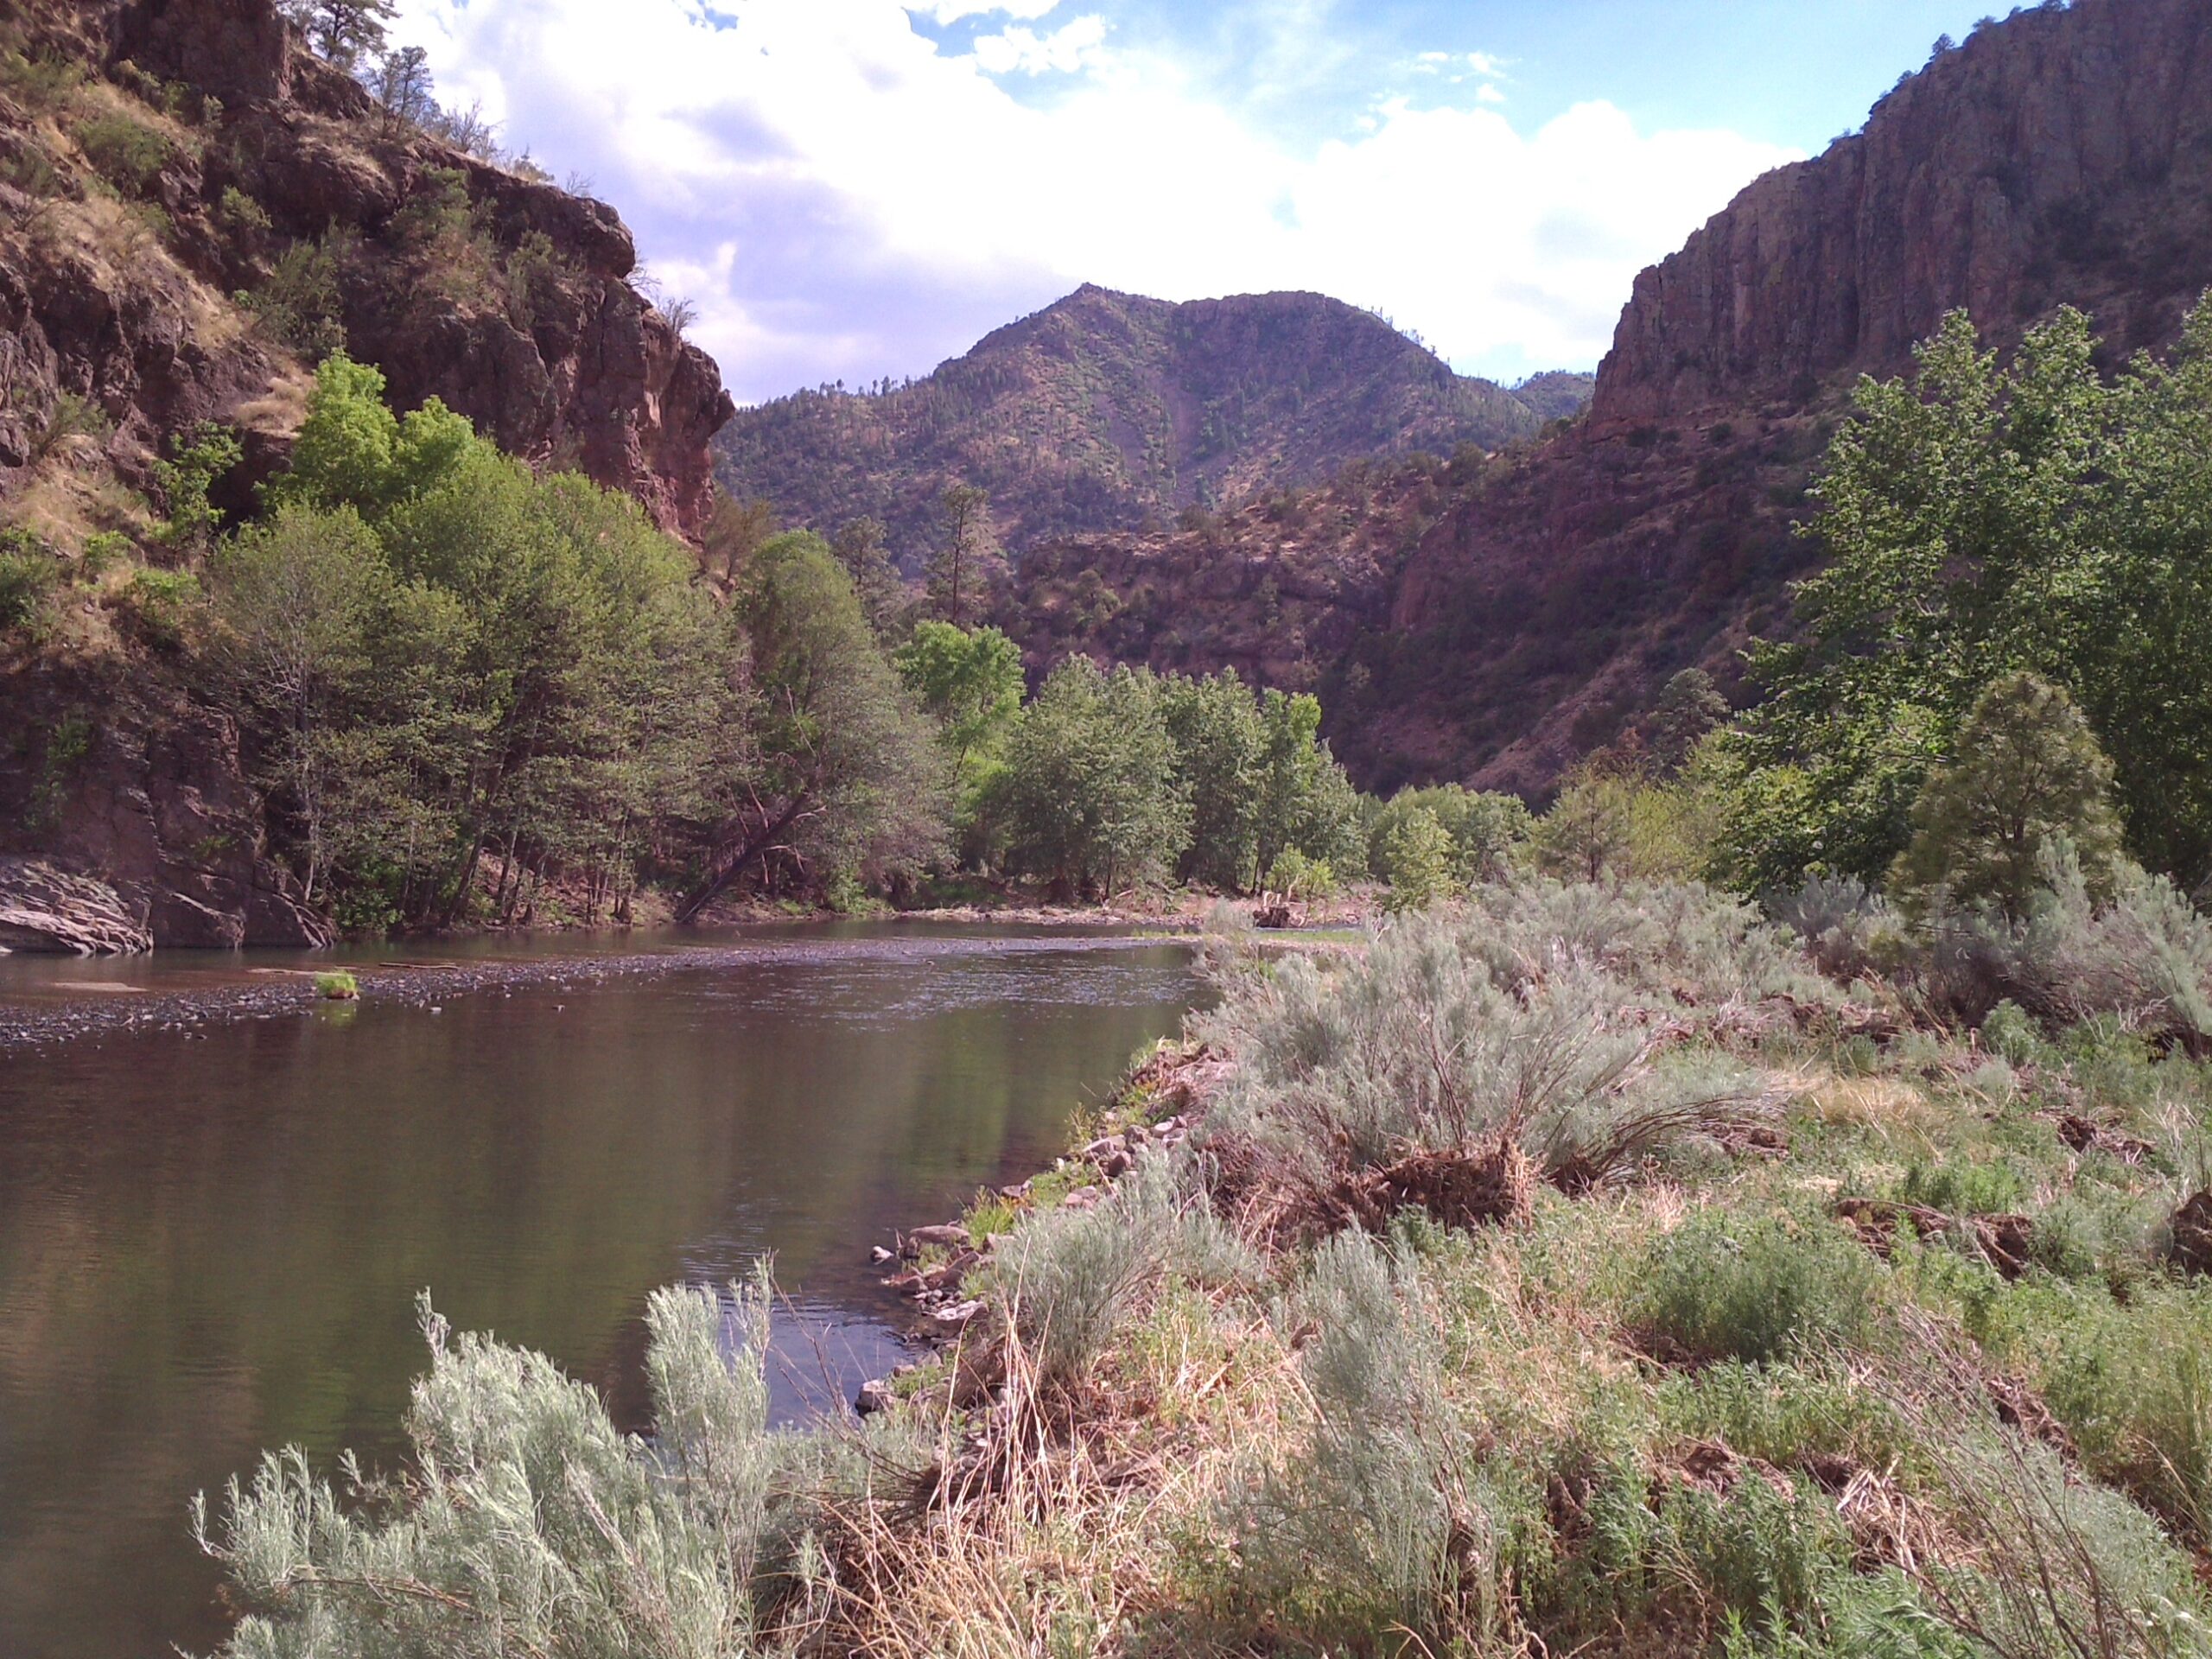 As World Leaders Meet to Discuss Climate Change, New Mexicans Applaud Local Effort to Protect the Gila and San Francisco Rivers